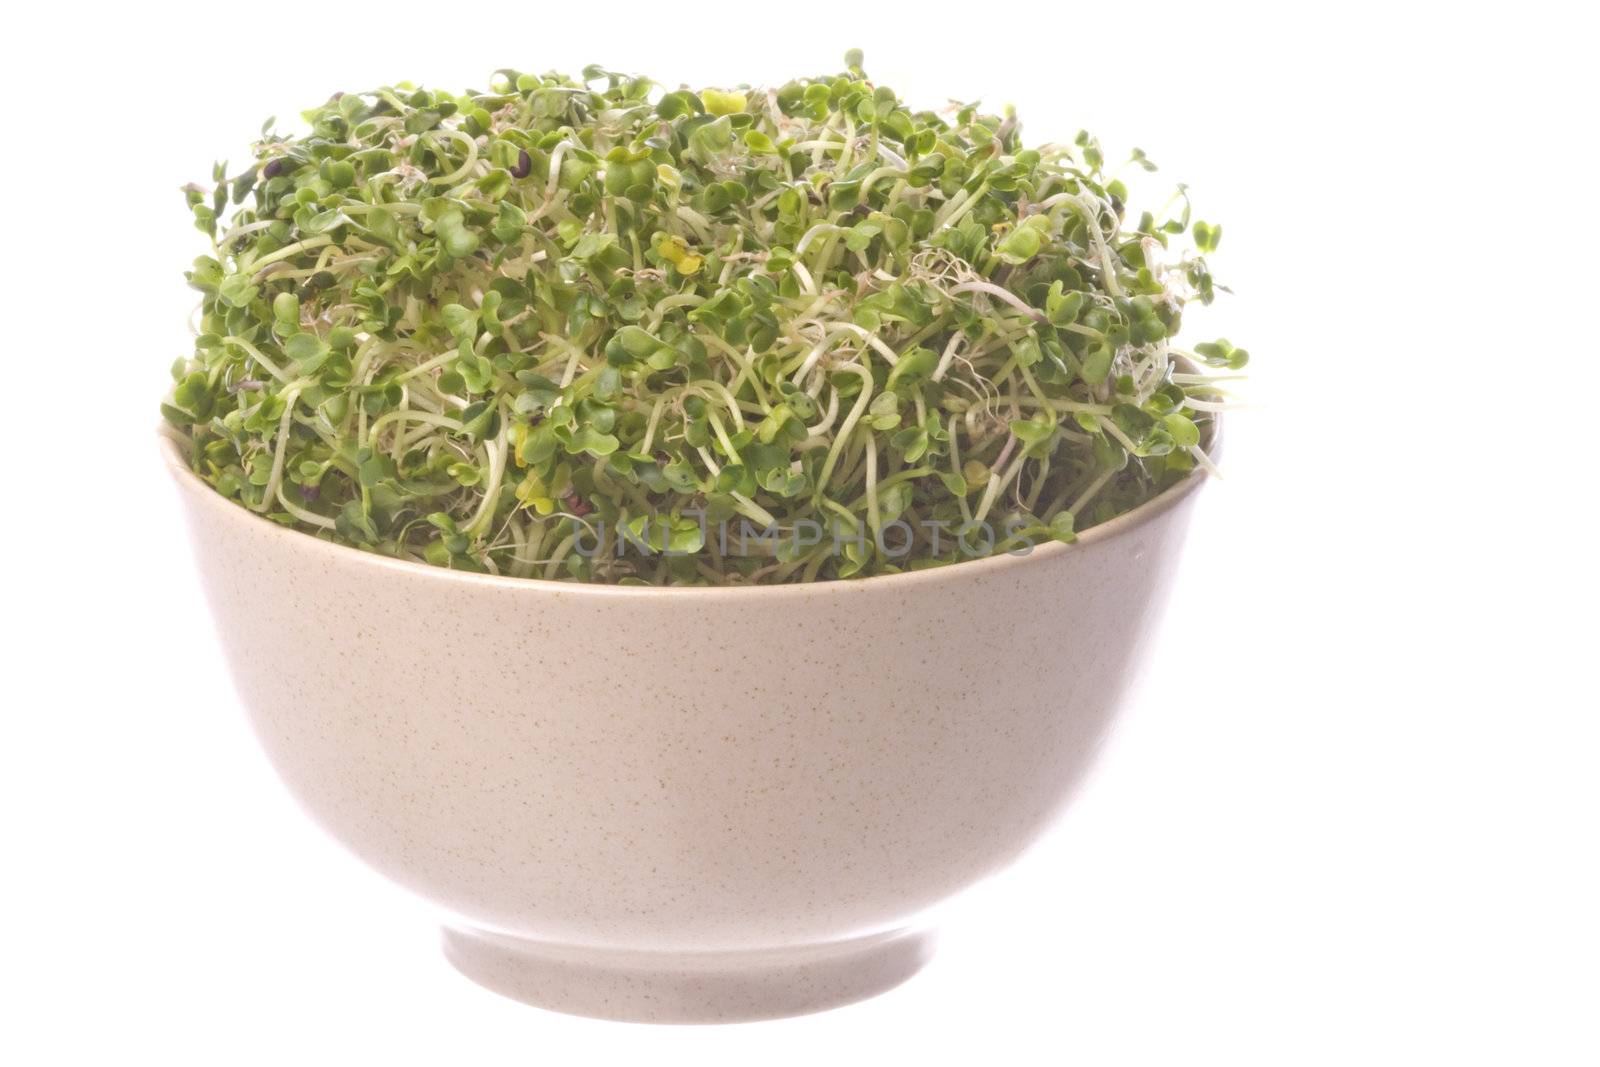 Isolated image of broccoli sprouts in a bowl.